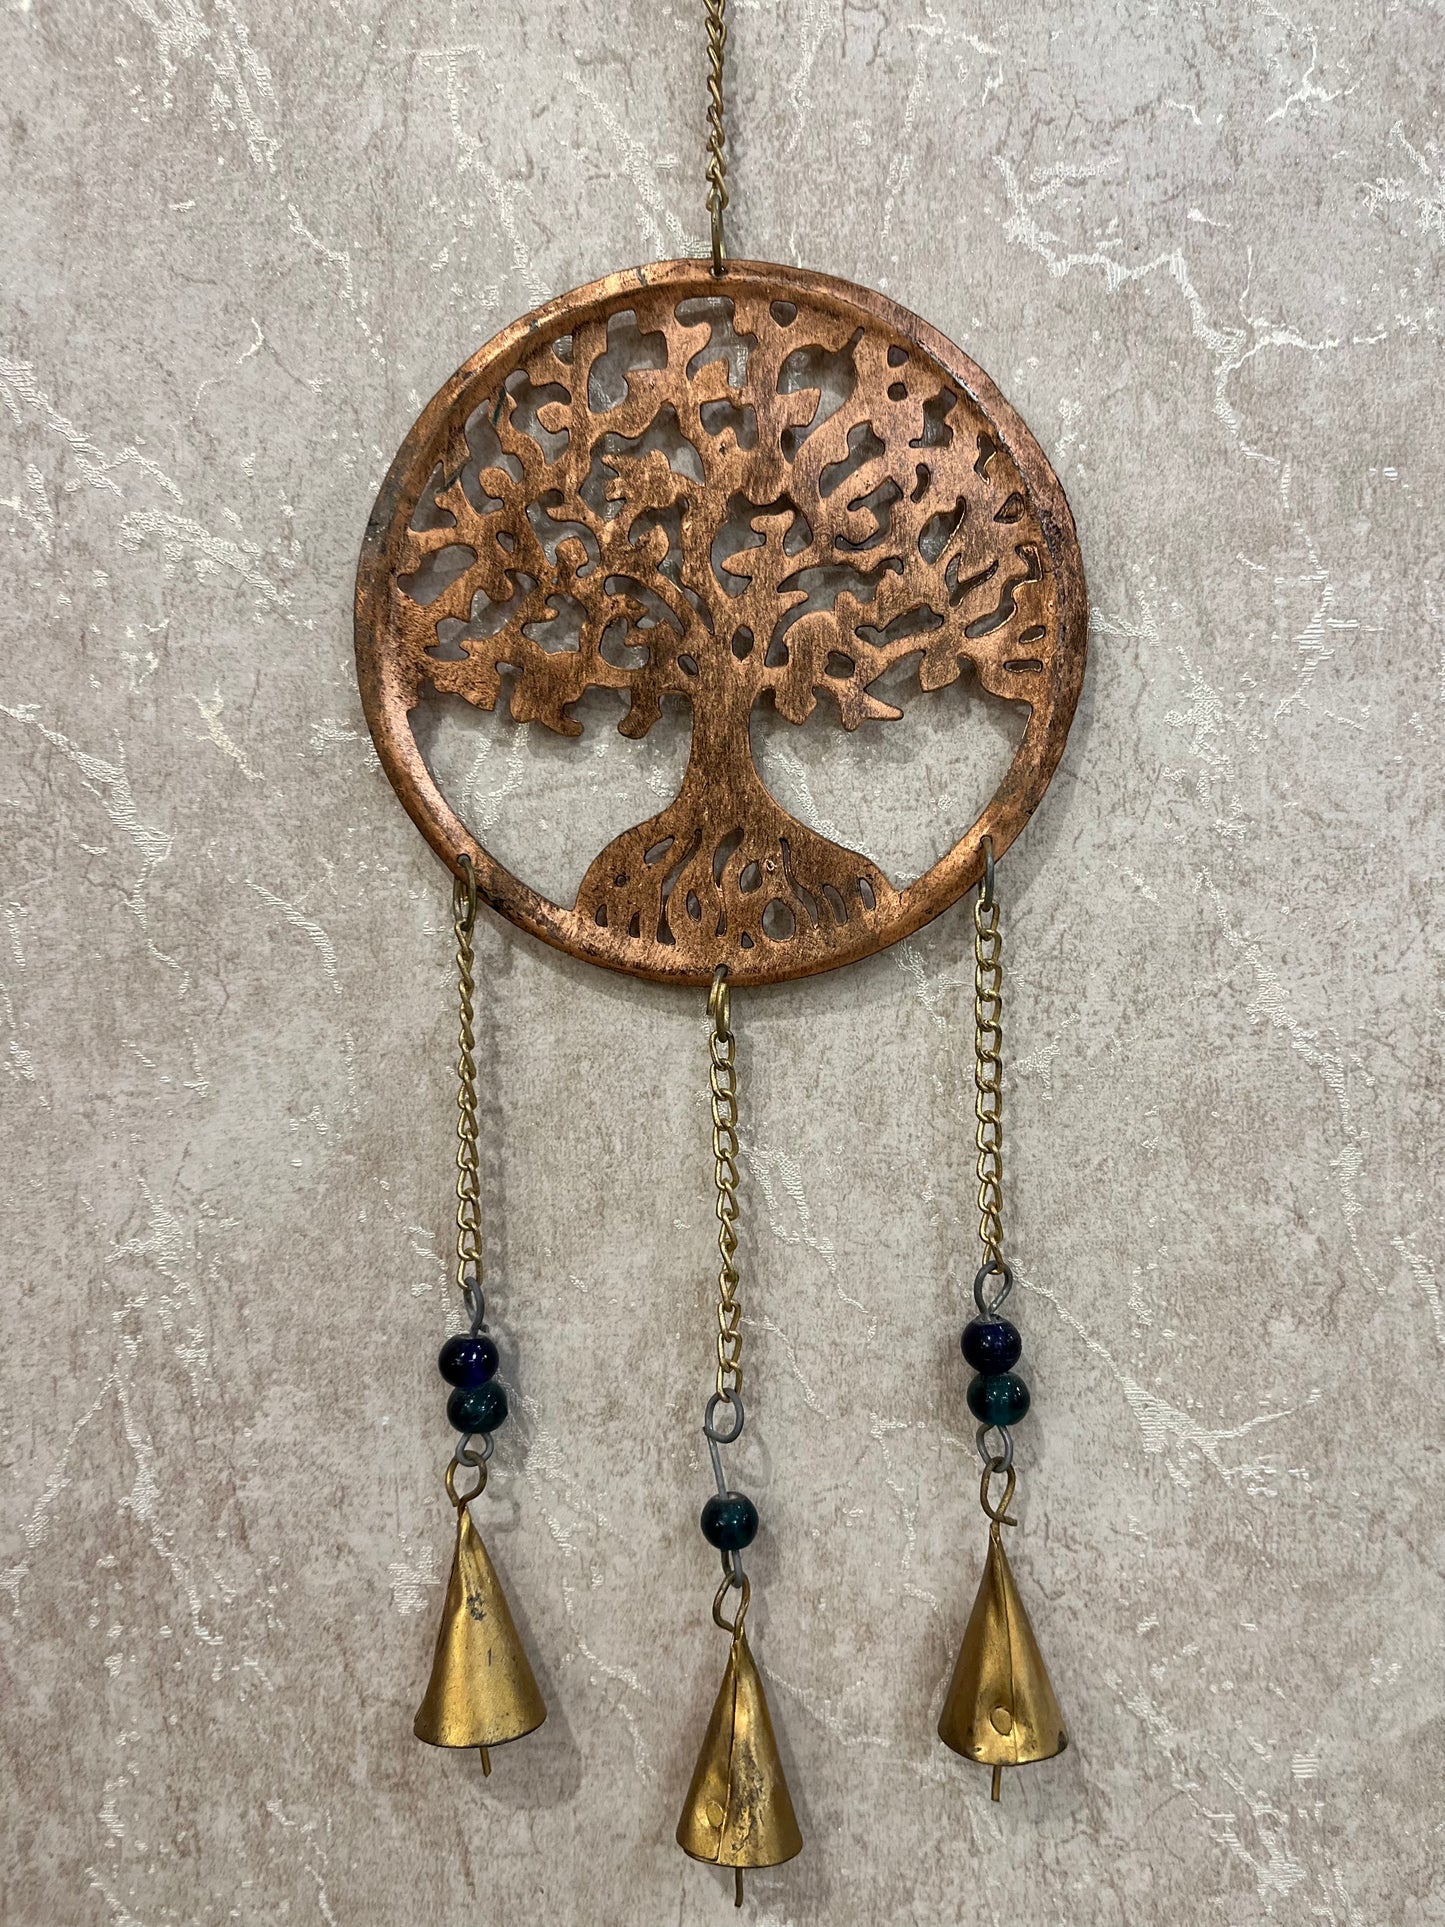 Tree Copper With Bell Hanging